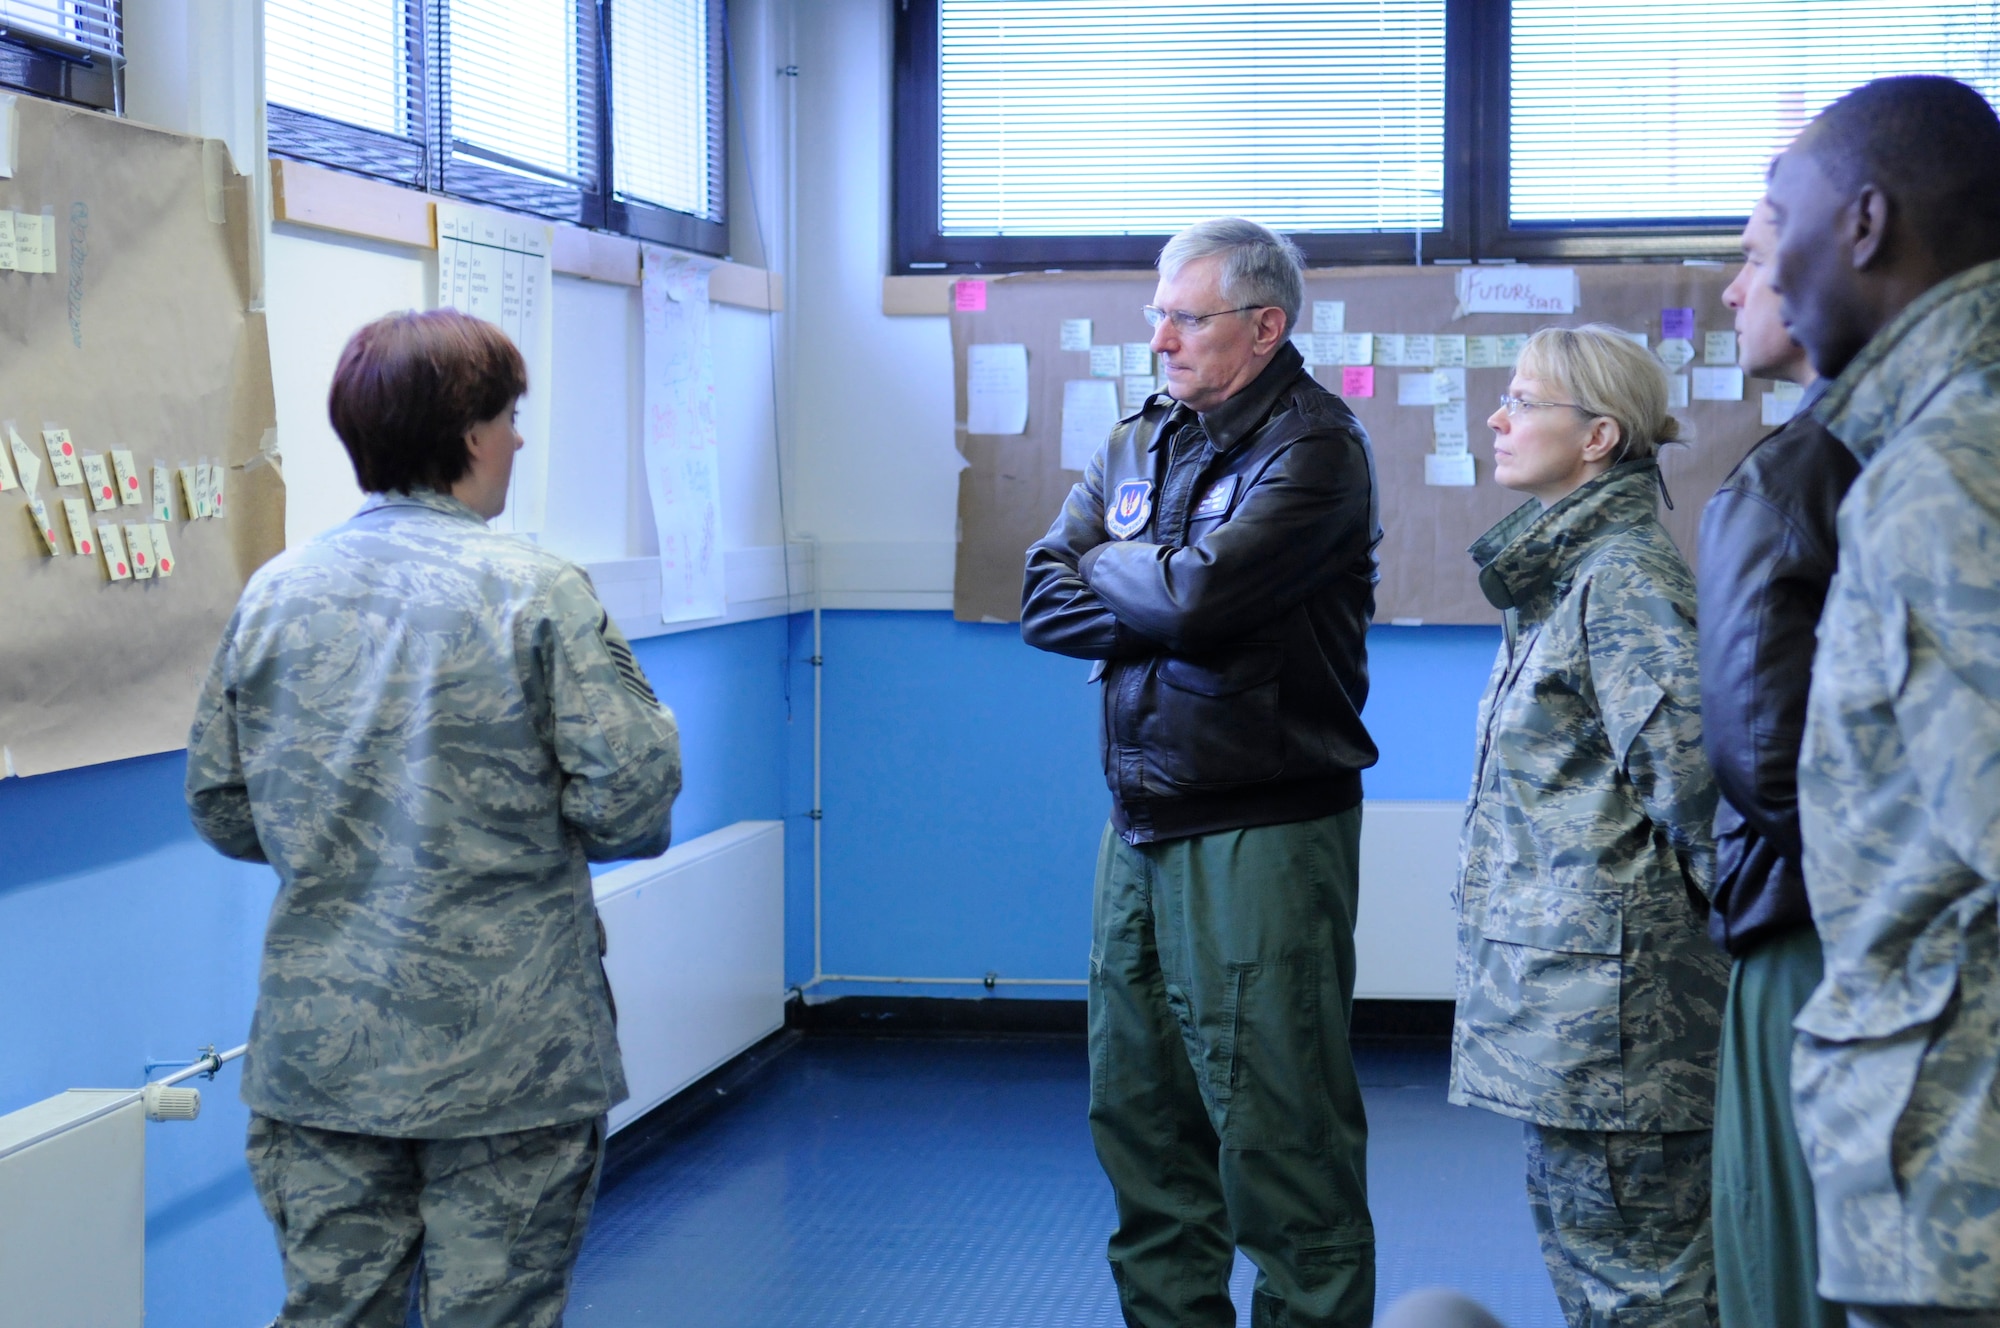 Gen. Roger A. Brady, U.S. Air Forces in Europe commander, along with Chief Master Sgt. Pamela Derrow, USAFE command chief, receives a briefing from members of the 86th Comptroller Squadron as part of his visit to the 86th Airlift Wing, March 2. The unit is currently taking part in an AFSO 21 initiative to improve their finance services across the base and throughout the Kaiserslautern Military Community.  (U.S. Air Force Photo by: Airman 1st Class Brittany Perry)